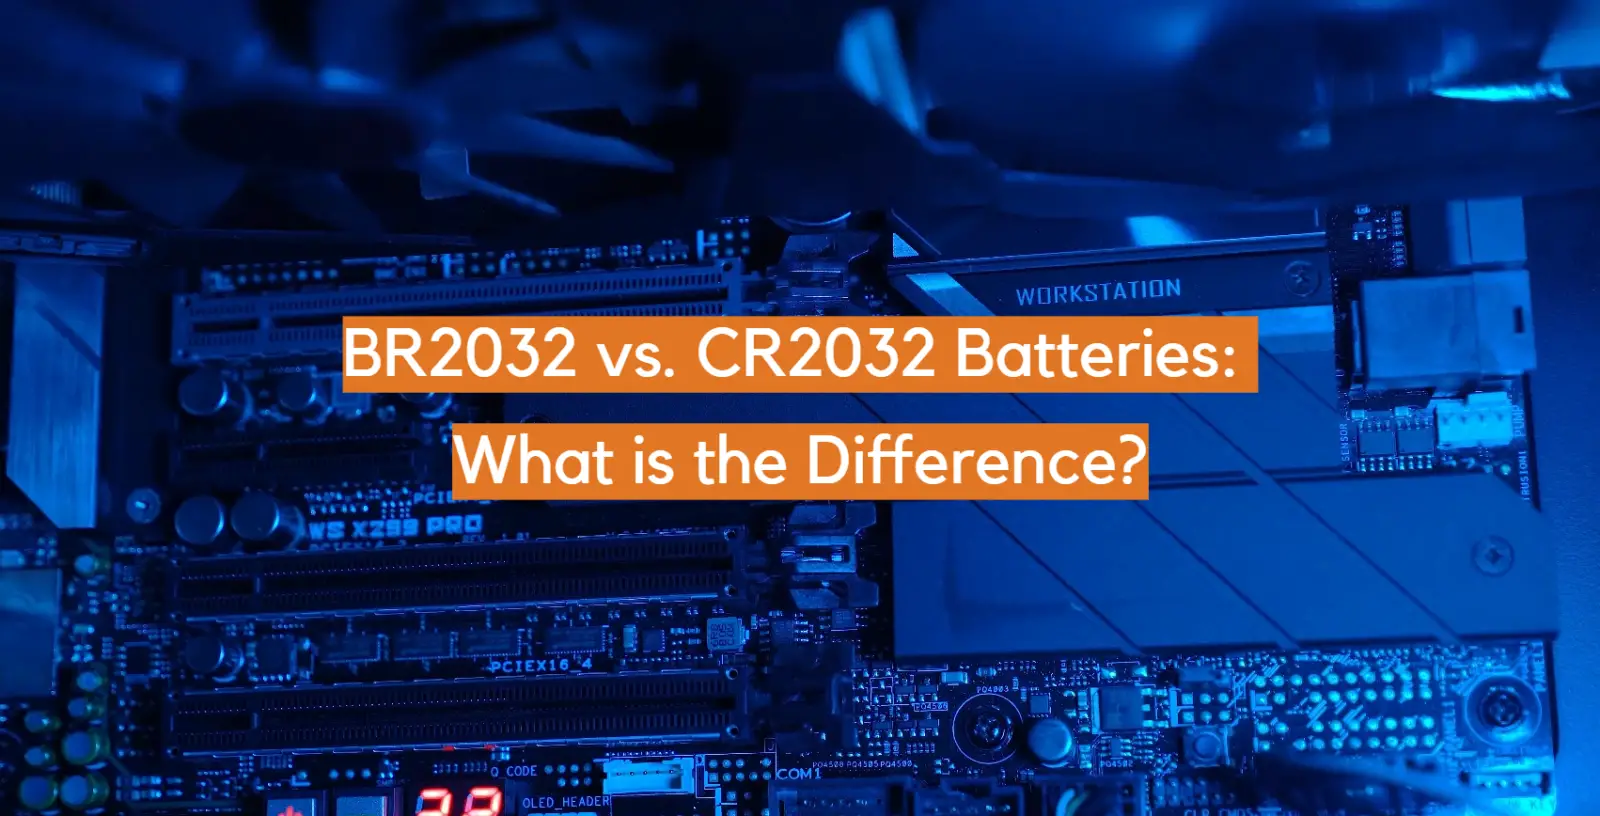 BR2032 vs. CR2032 Batteries: What is the Difference?